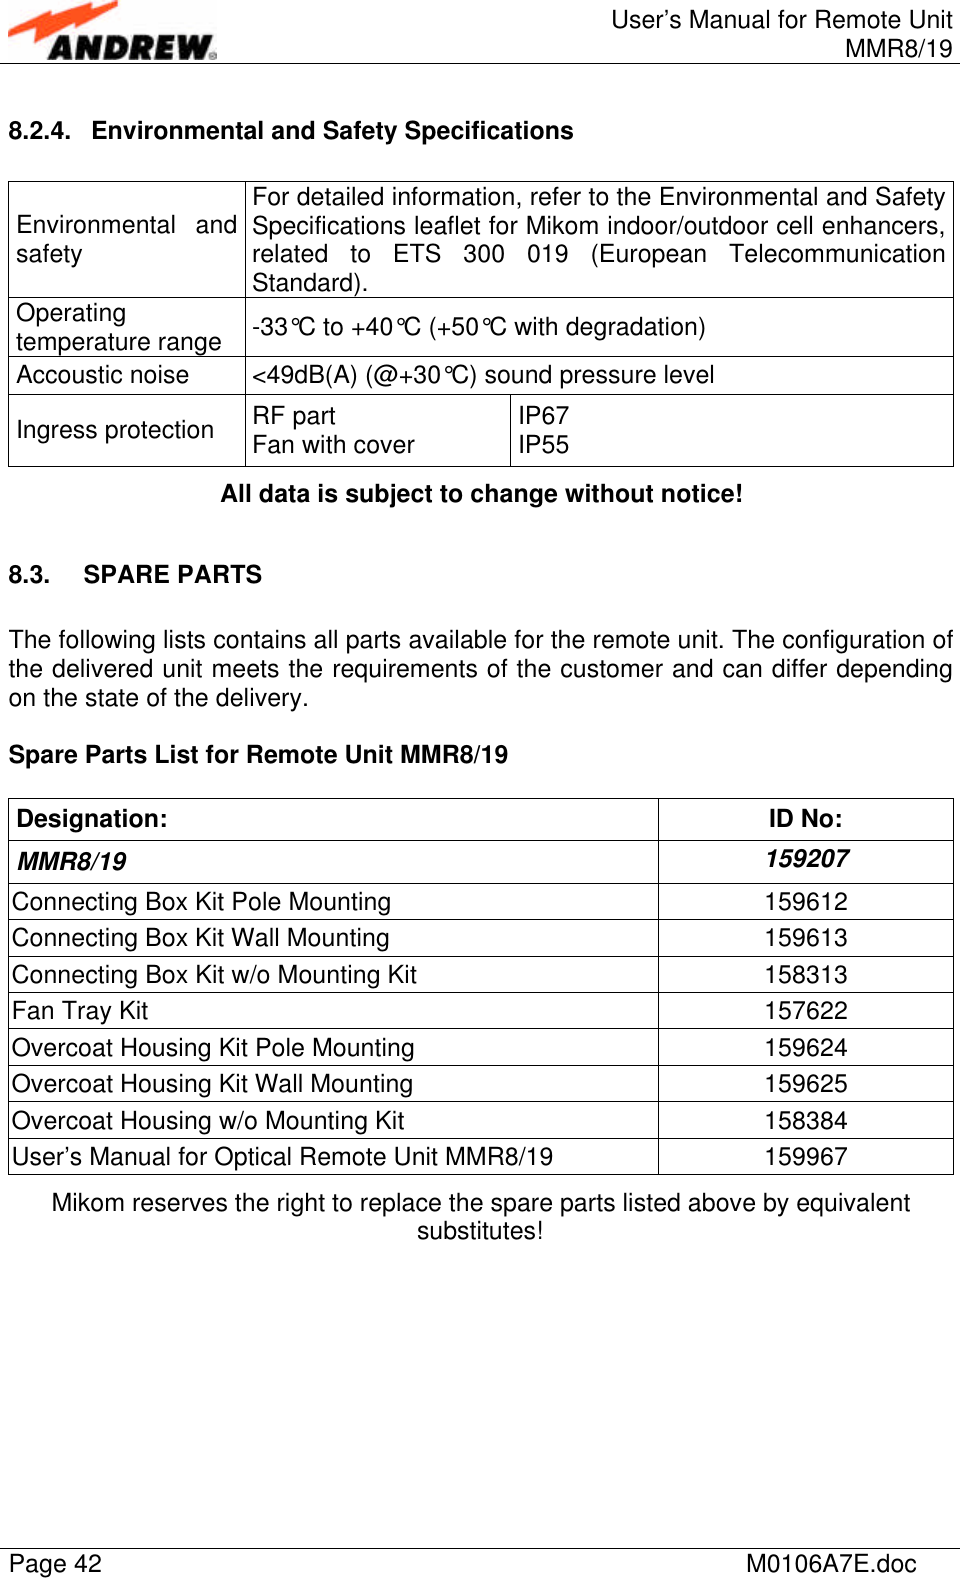 User’s Manual for Remote UnitMMR8/19Page 42 M0106A7E.doc8.2.4. Environmental and Safety SpecificationsEnvironmental andsafetyFor detailed information, refer to the Environmental and SafetySpecifications leaflet for Mikom indoor/outdoor cell enhancers,related to ETS 300 019 (European TelecommunicationStandard).Operatingtemperature range -33°C to +40°C (+50°C with degradation)Accoustic noise &lt;49dB(A) (@+30°C) sound pressure levelIngress protection RF partFan with cover IP67IP55All data is subject to change without notice!8.3. SPARE PARTSThe following lists contains all parts available for the remote unit. The configuration ofthe delivered unit meets the requirements of the customer and can differ dependingon the state of the delivery.Spare Parts List for Remote Unit MMR8/19Designation: ID No:MMR8/19 159207Connecting Box Kit Pole Mounting 159612Connecting Box Kit Wall Mounting 159613Connecting Box Kit w/o Mounting Kit 158313Fan Tray Kit 157622Overcoat Housing Kit Pole Mounting 159624Overcoat Housing Kit Wall Mounting 159625Overcoat Housing w/o Mounting Kit 158384User’s Manual for Optical Remote Unit MMR8/19 159967Mikom reserves the right to replace the spare parts listed above by equivalentsubstitutes!